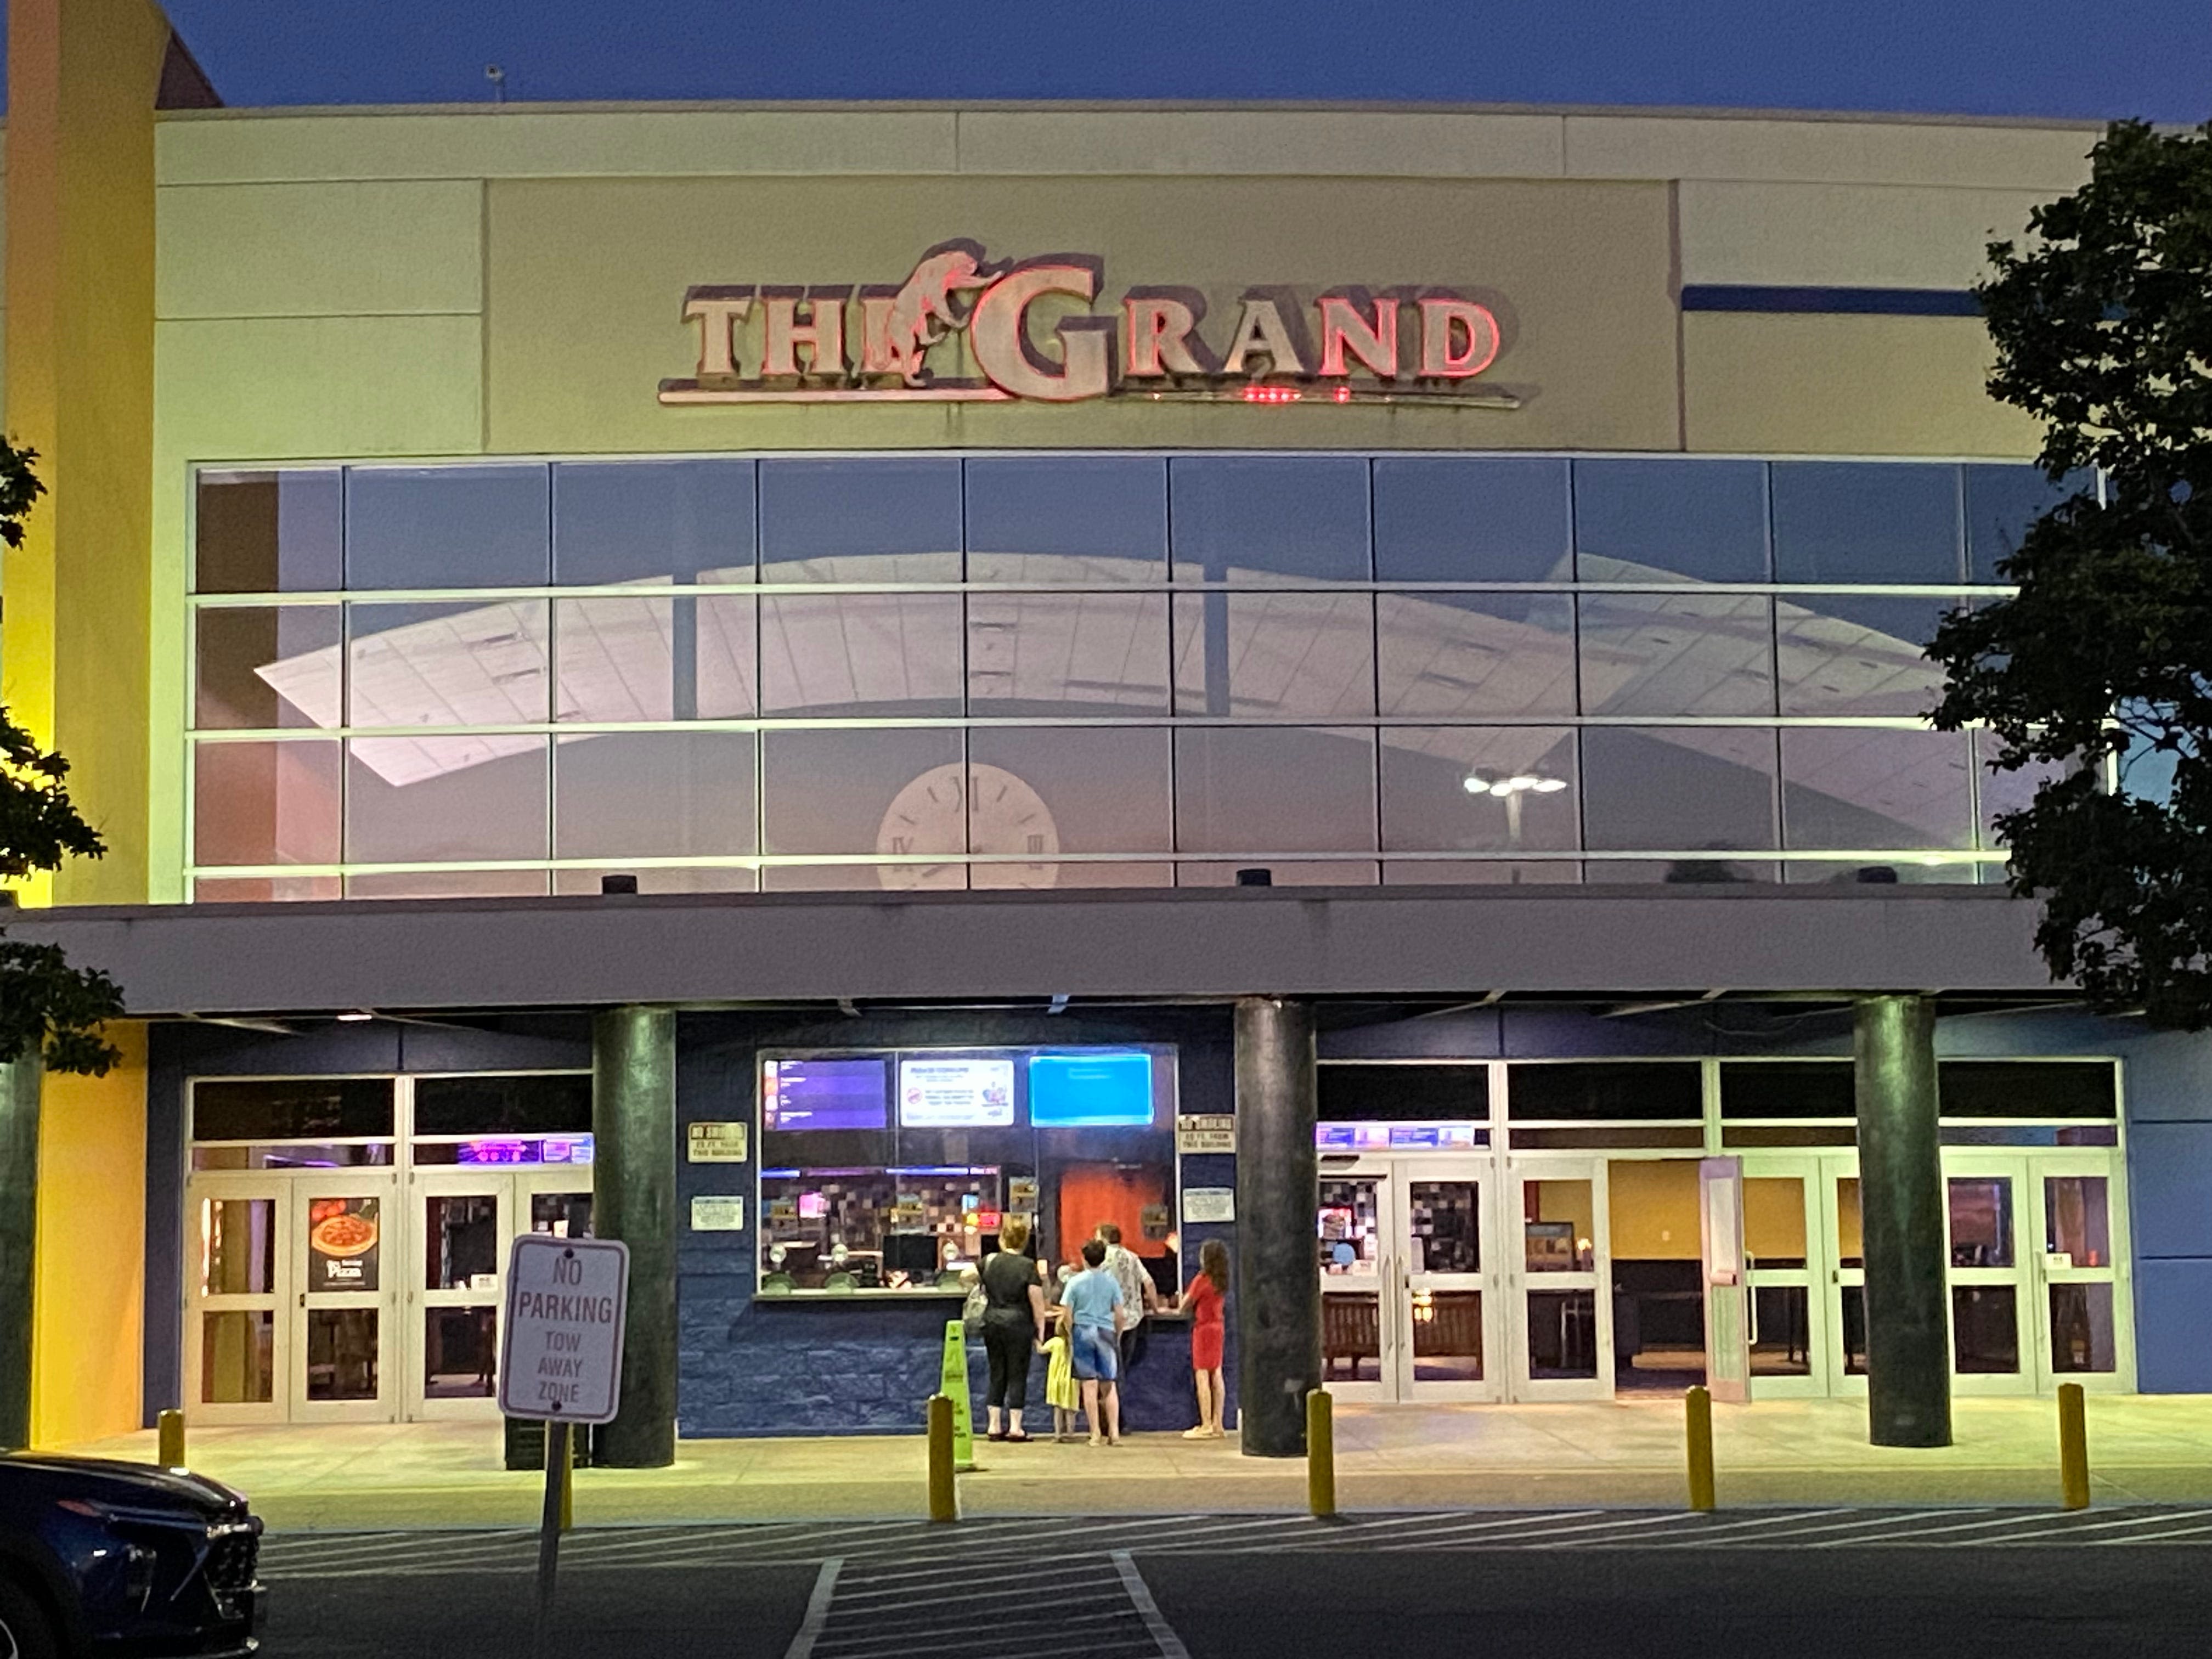 Catch a free kids' movie this summer at The Grand in Alexandria